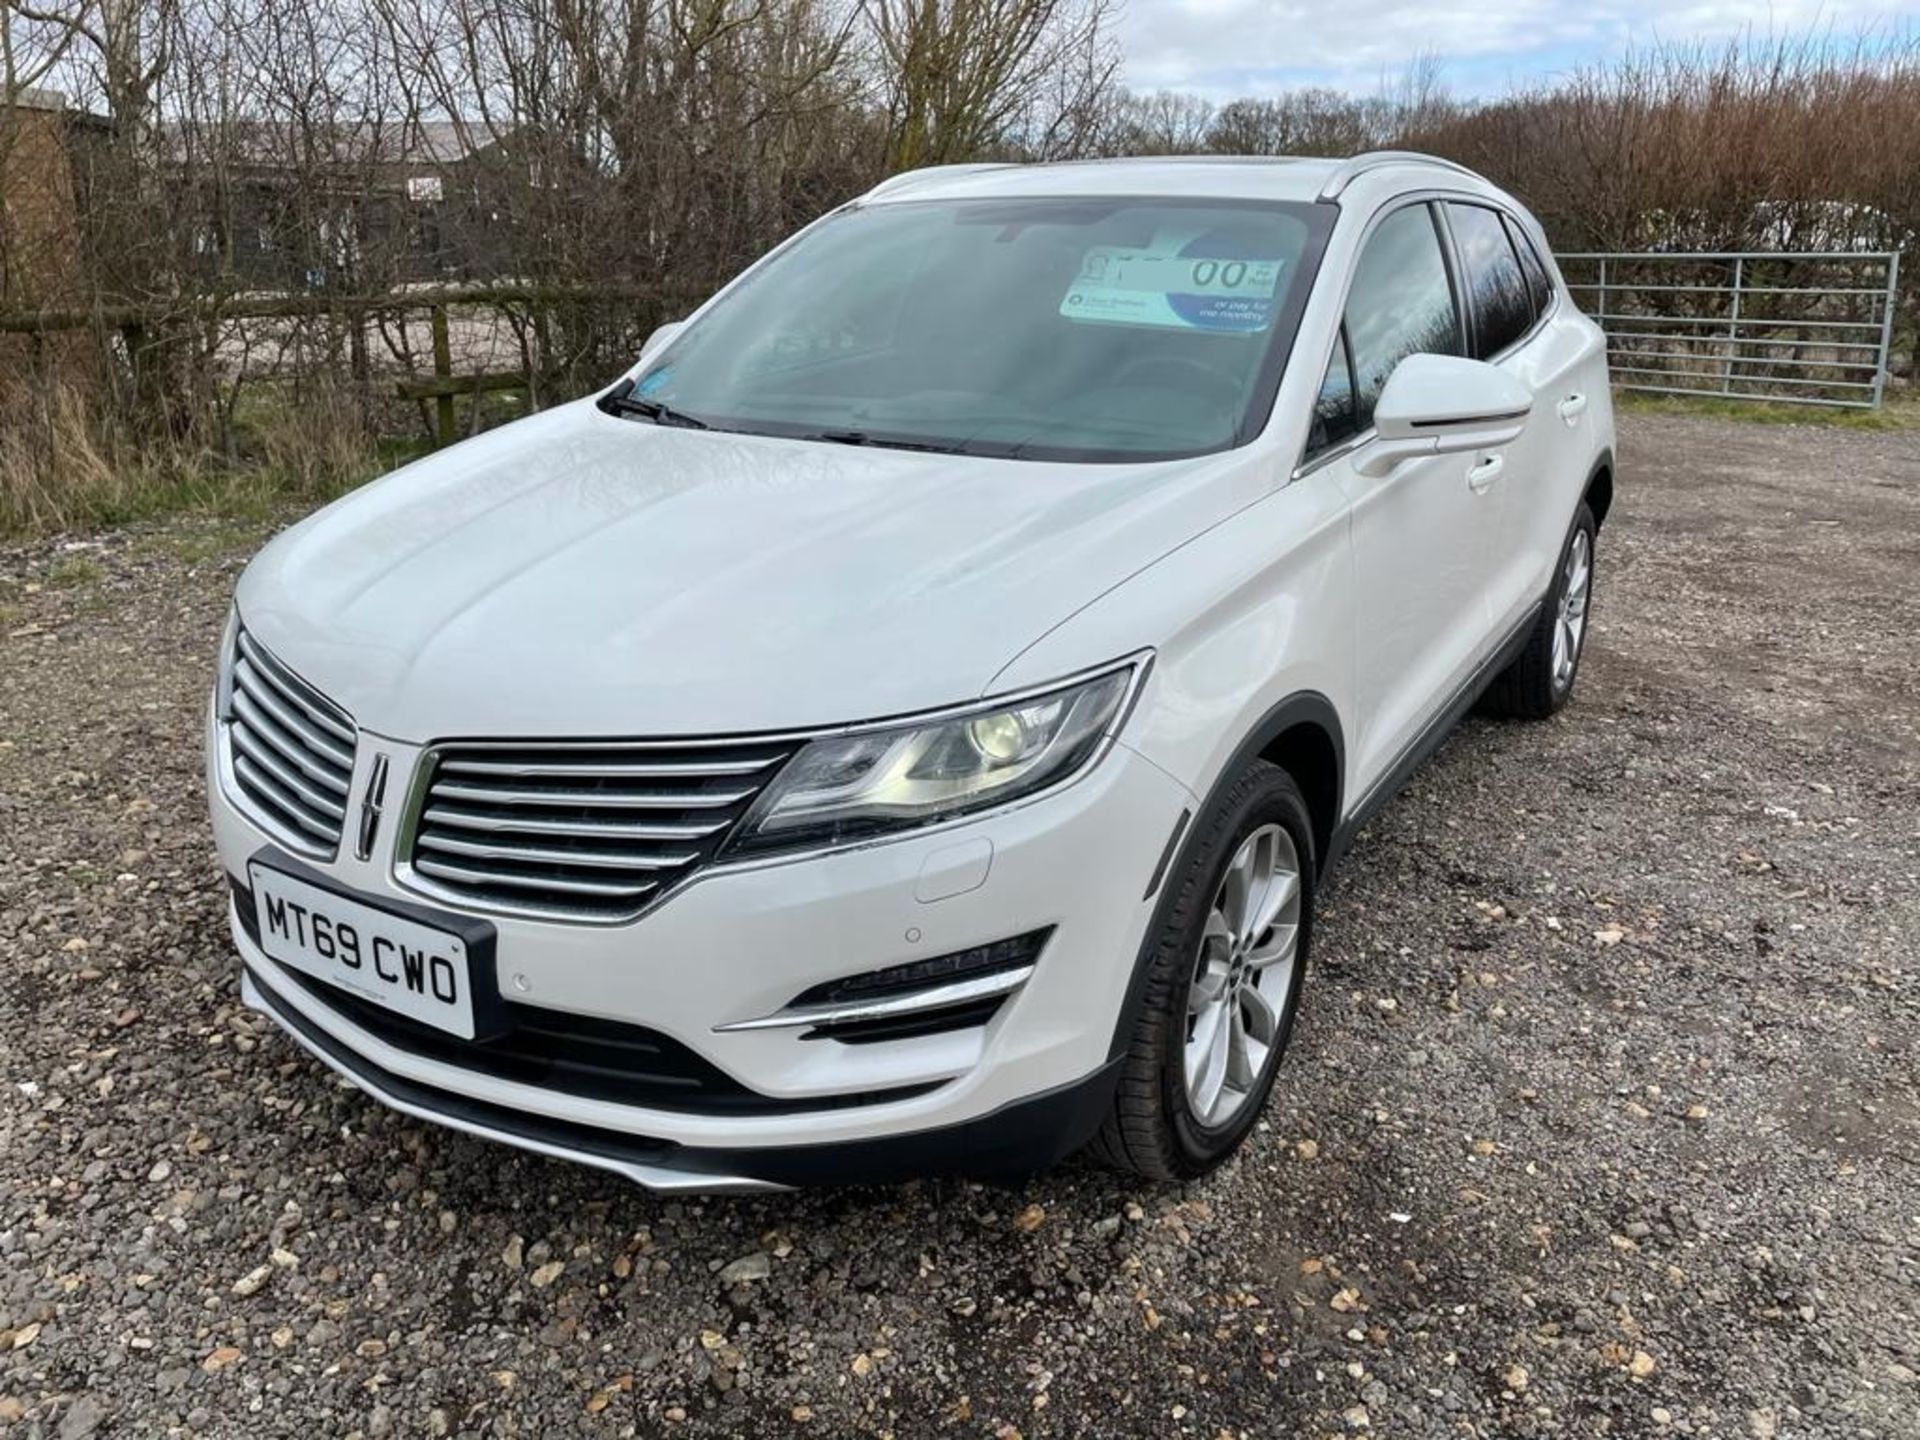 69 REG LINCOLN MKC RESERVE 2.0L ECOBOOST, 200bhp, PLATINUM WHITE WITH CAPPUCCINO LEATHER INTERIOR - Image 4 of 13